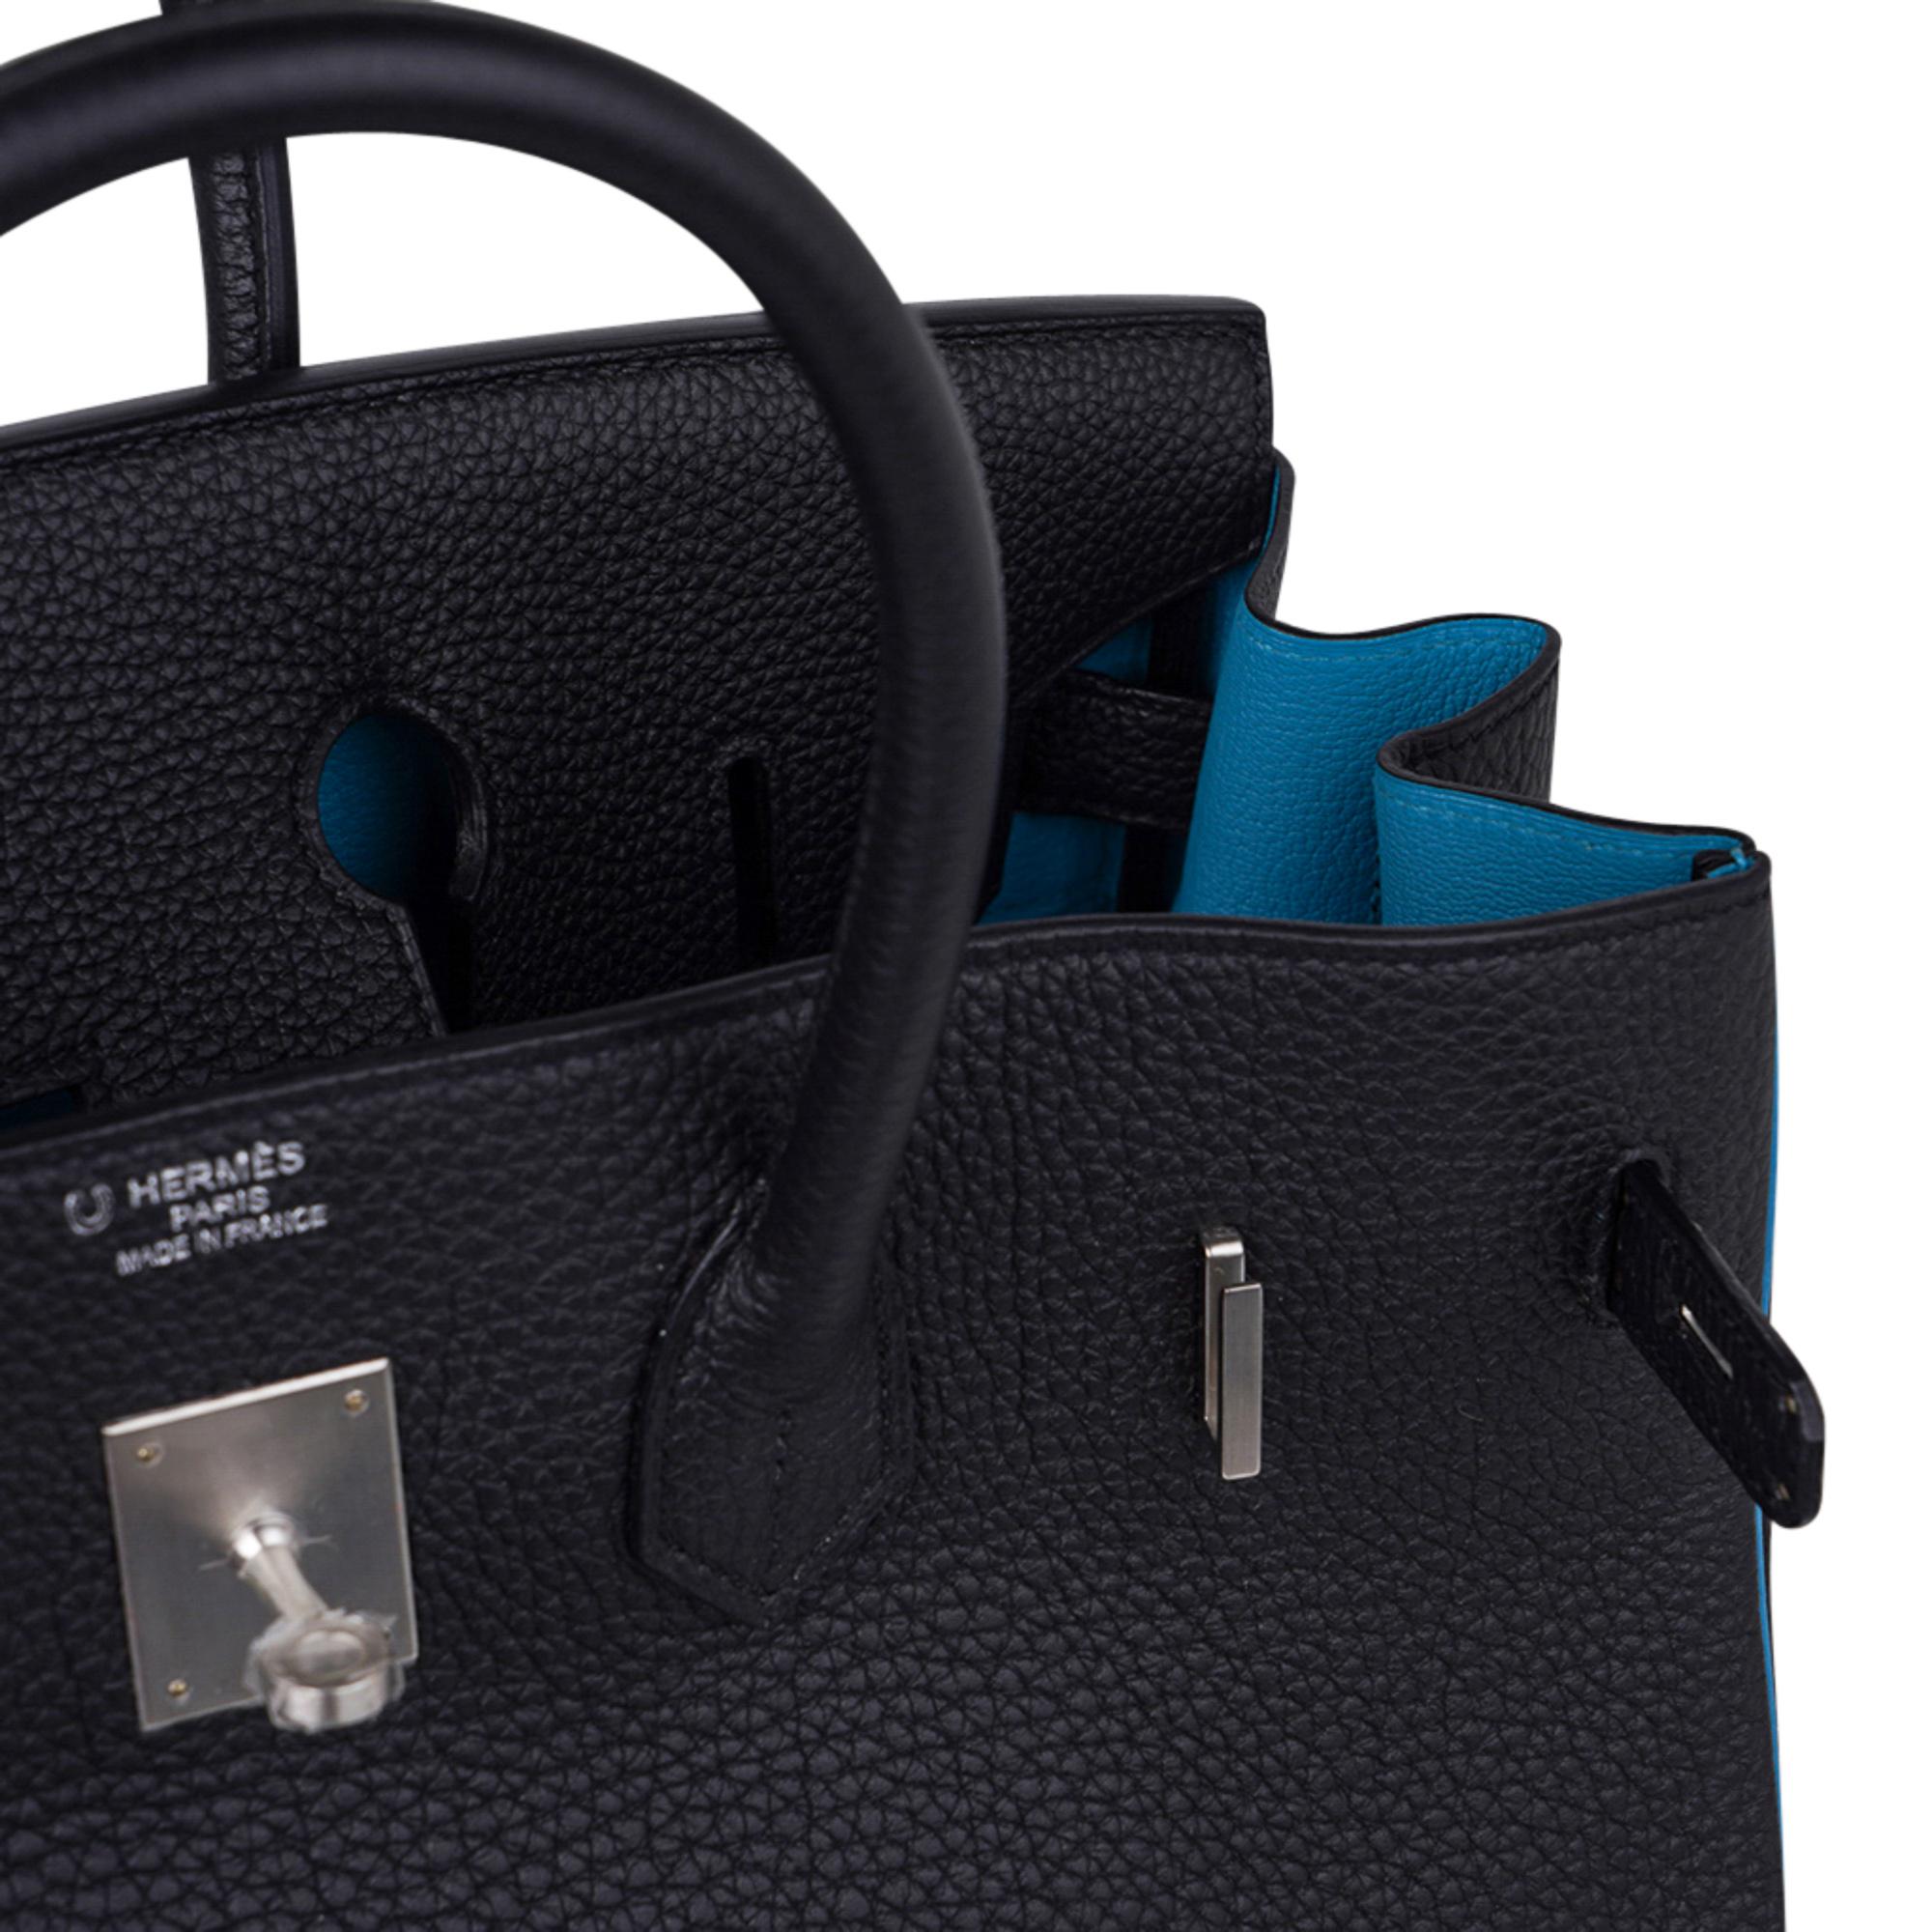 Mightychic offers an Hermes Birkin HSS 35 bag featured in Black with Turquoise interior and piping. 
A stunning special order Hermes Birkin bag.
Unique with rare brushed palladium hardware.
The supple Togo leather is scratch resistant and soft to